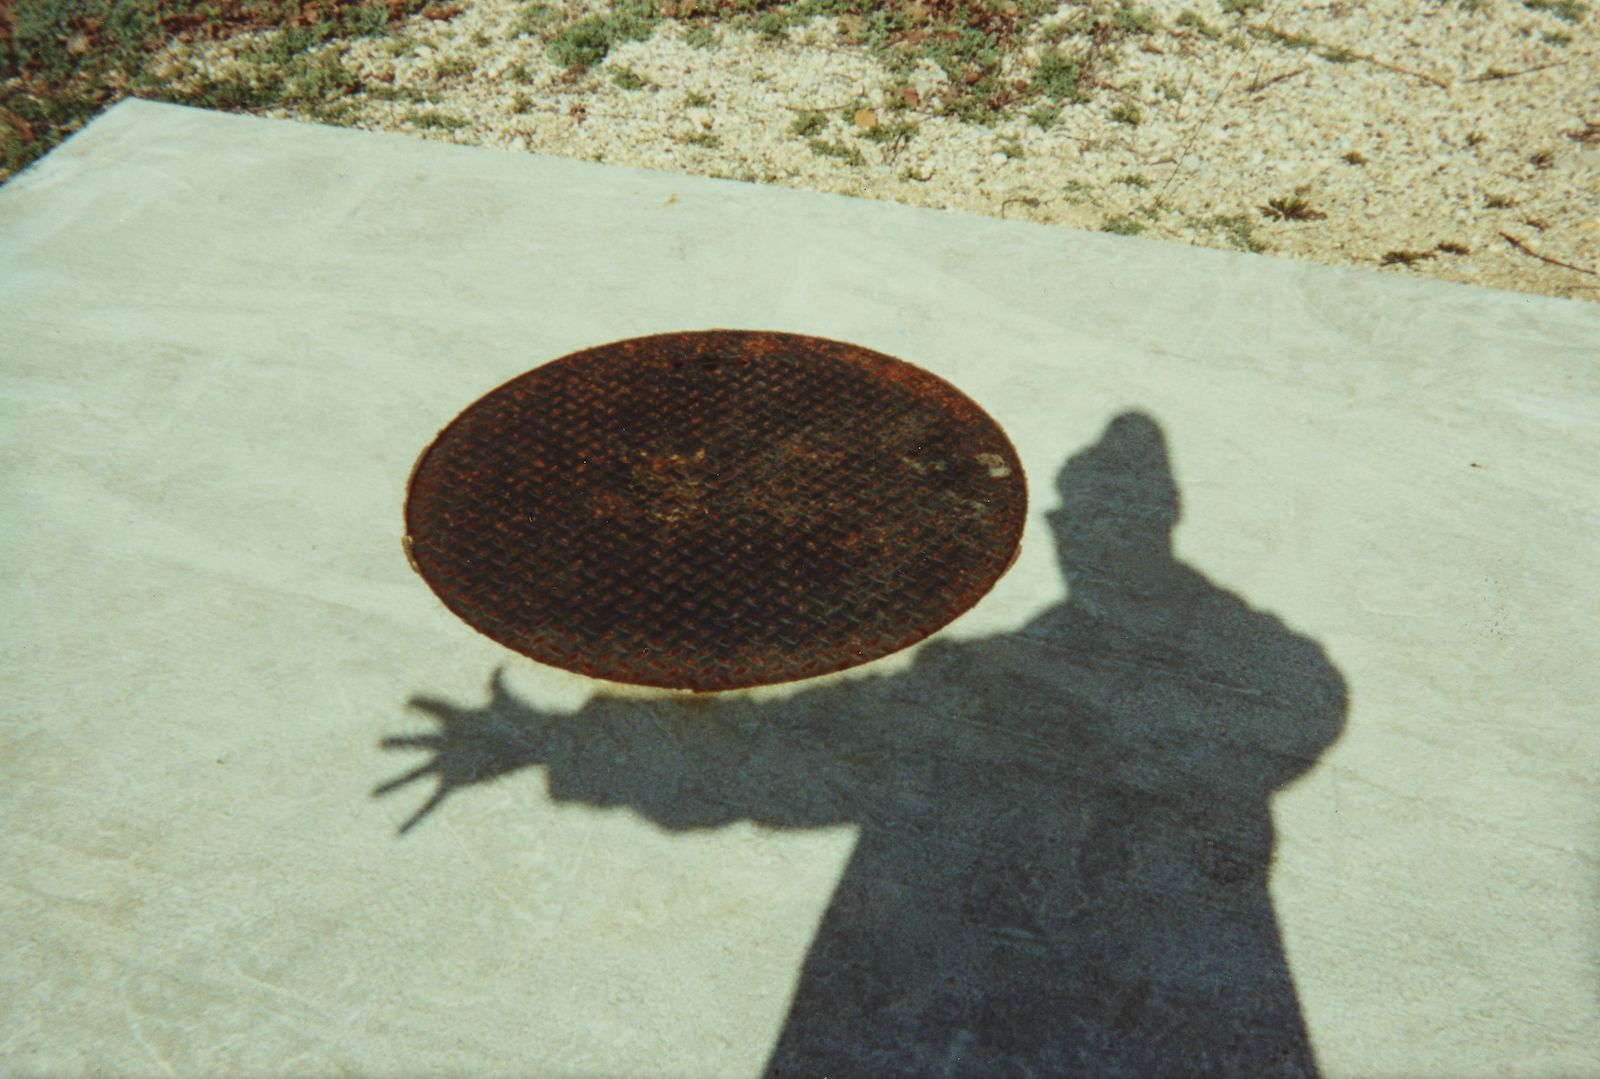 A shadow of a man extending his arm next to a manhole